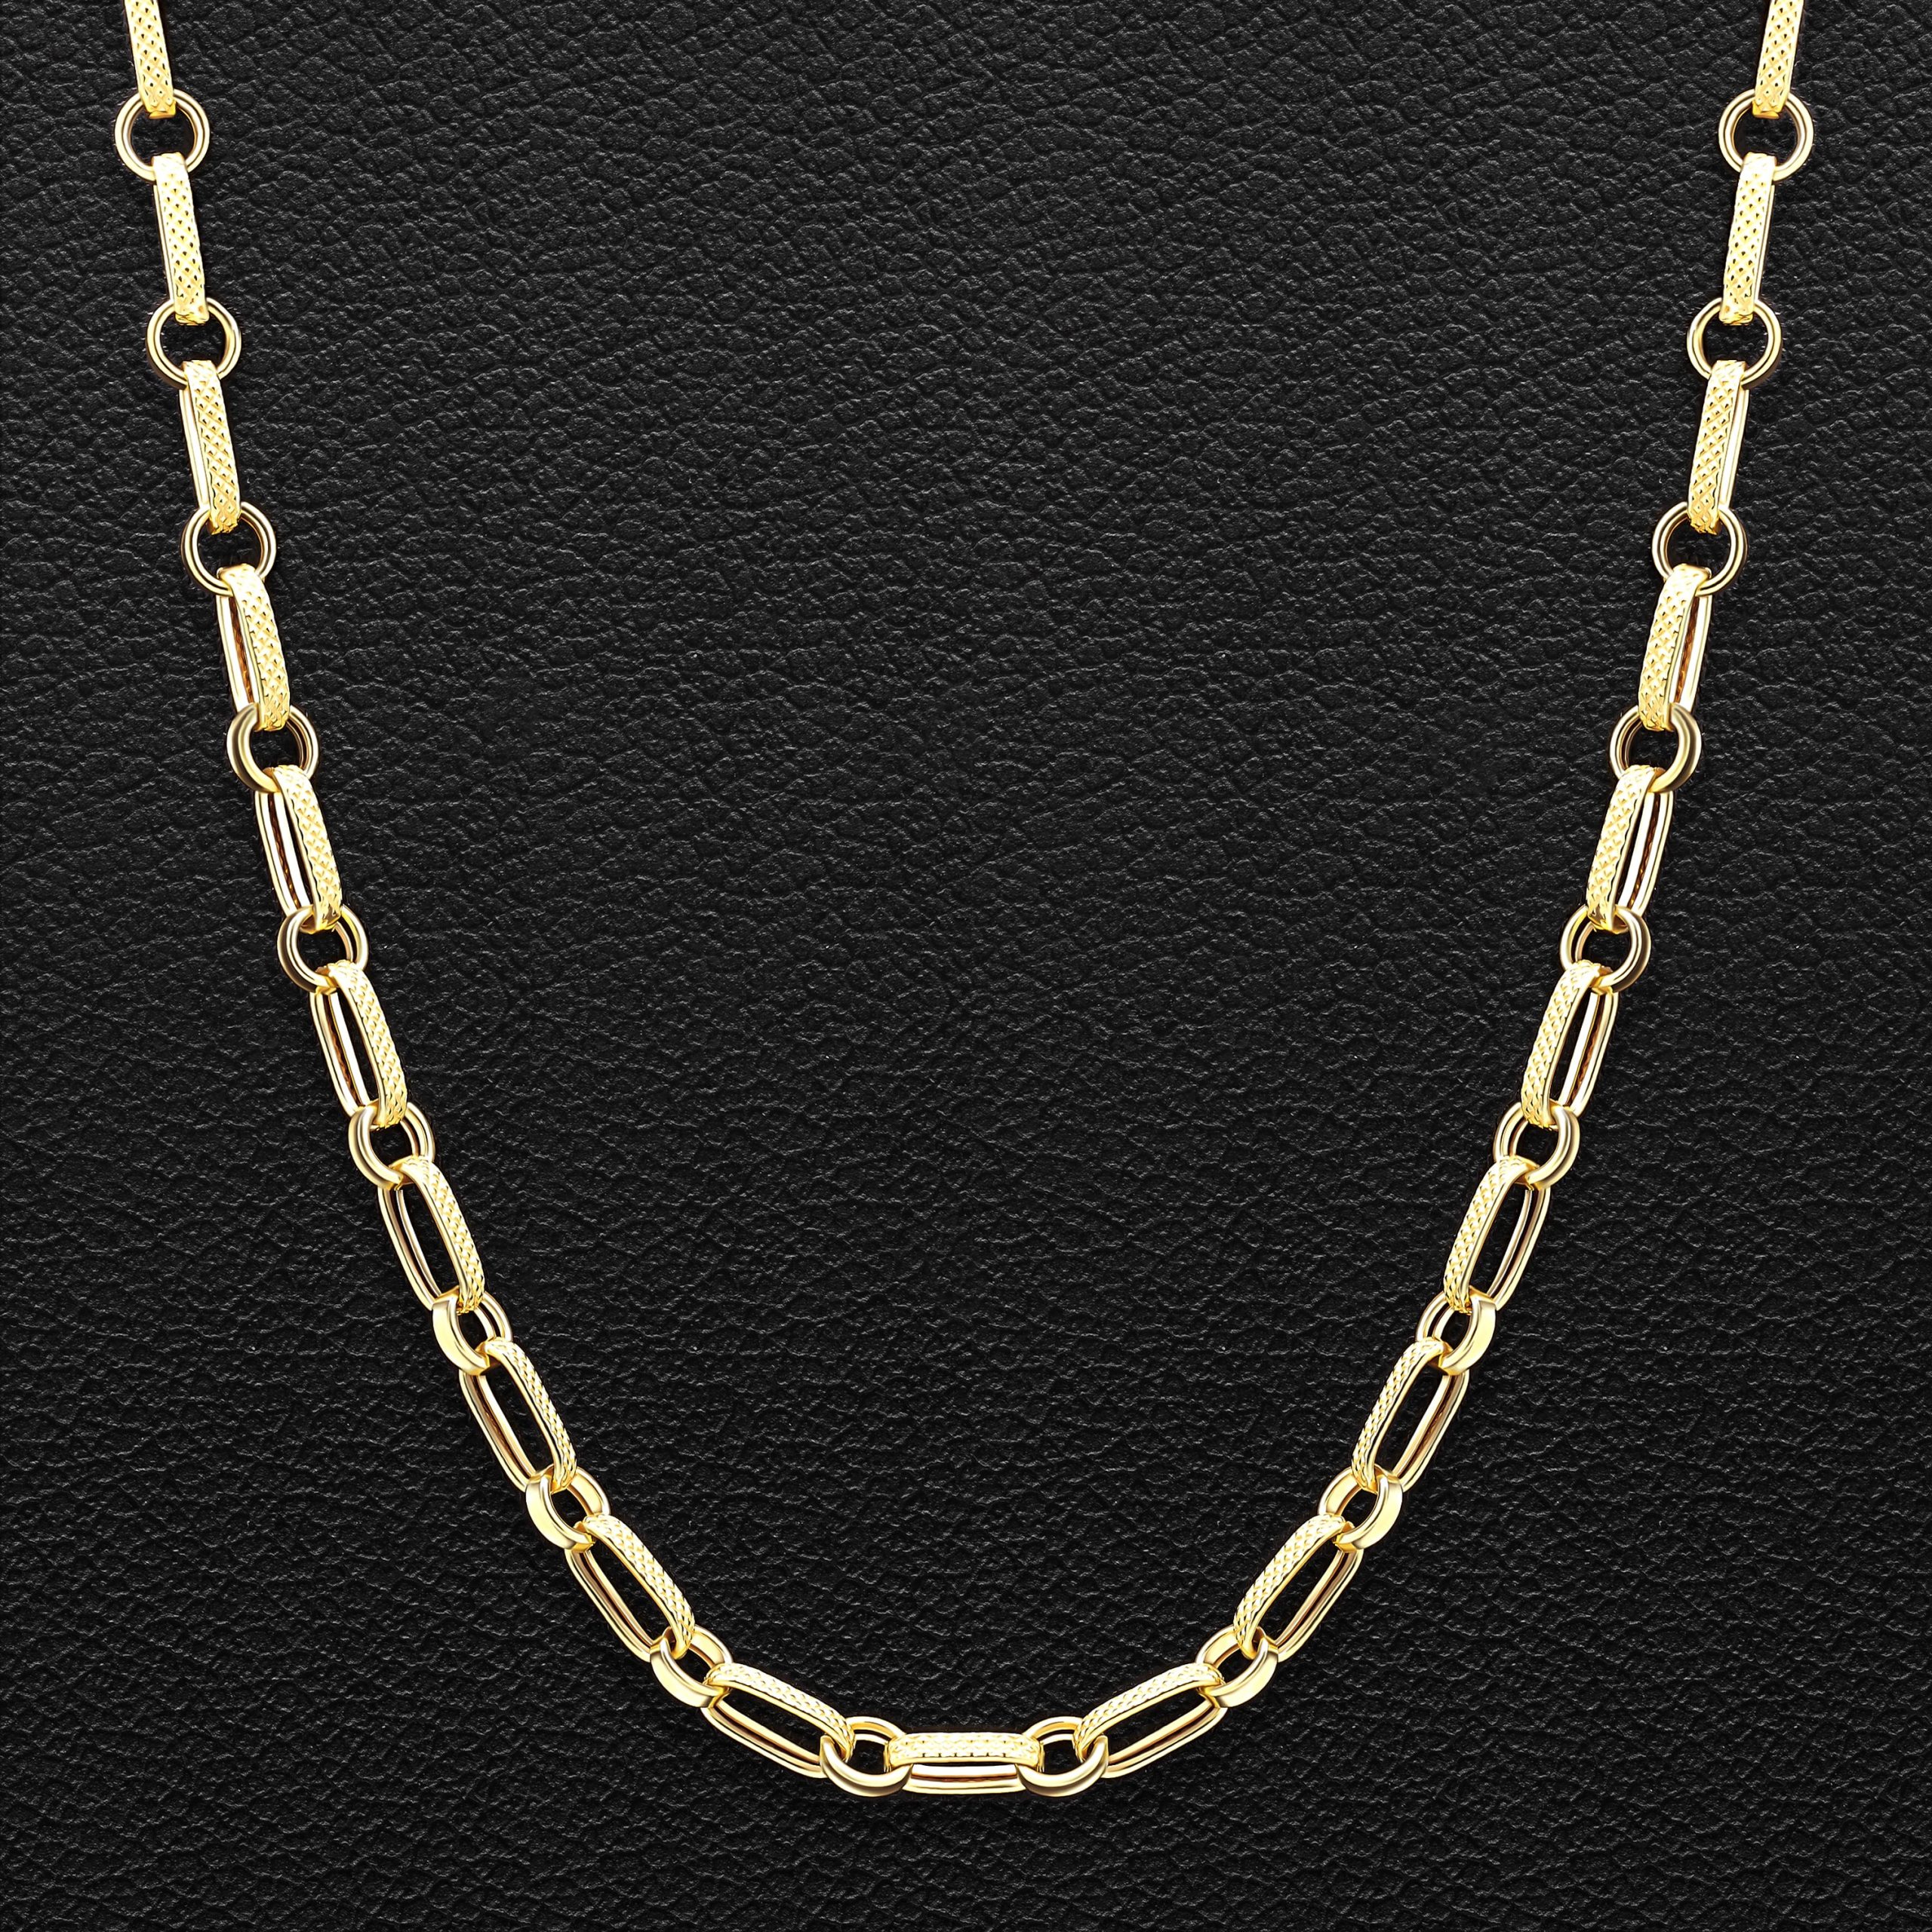 22K gold chain necklace